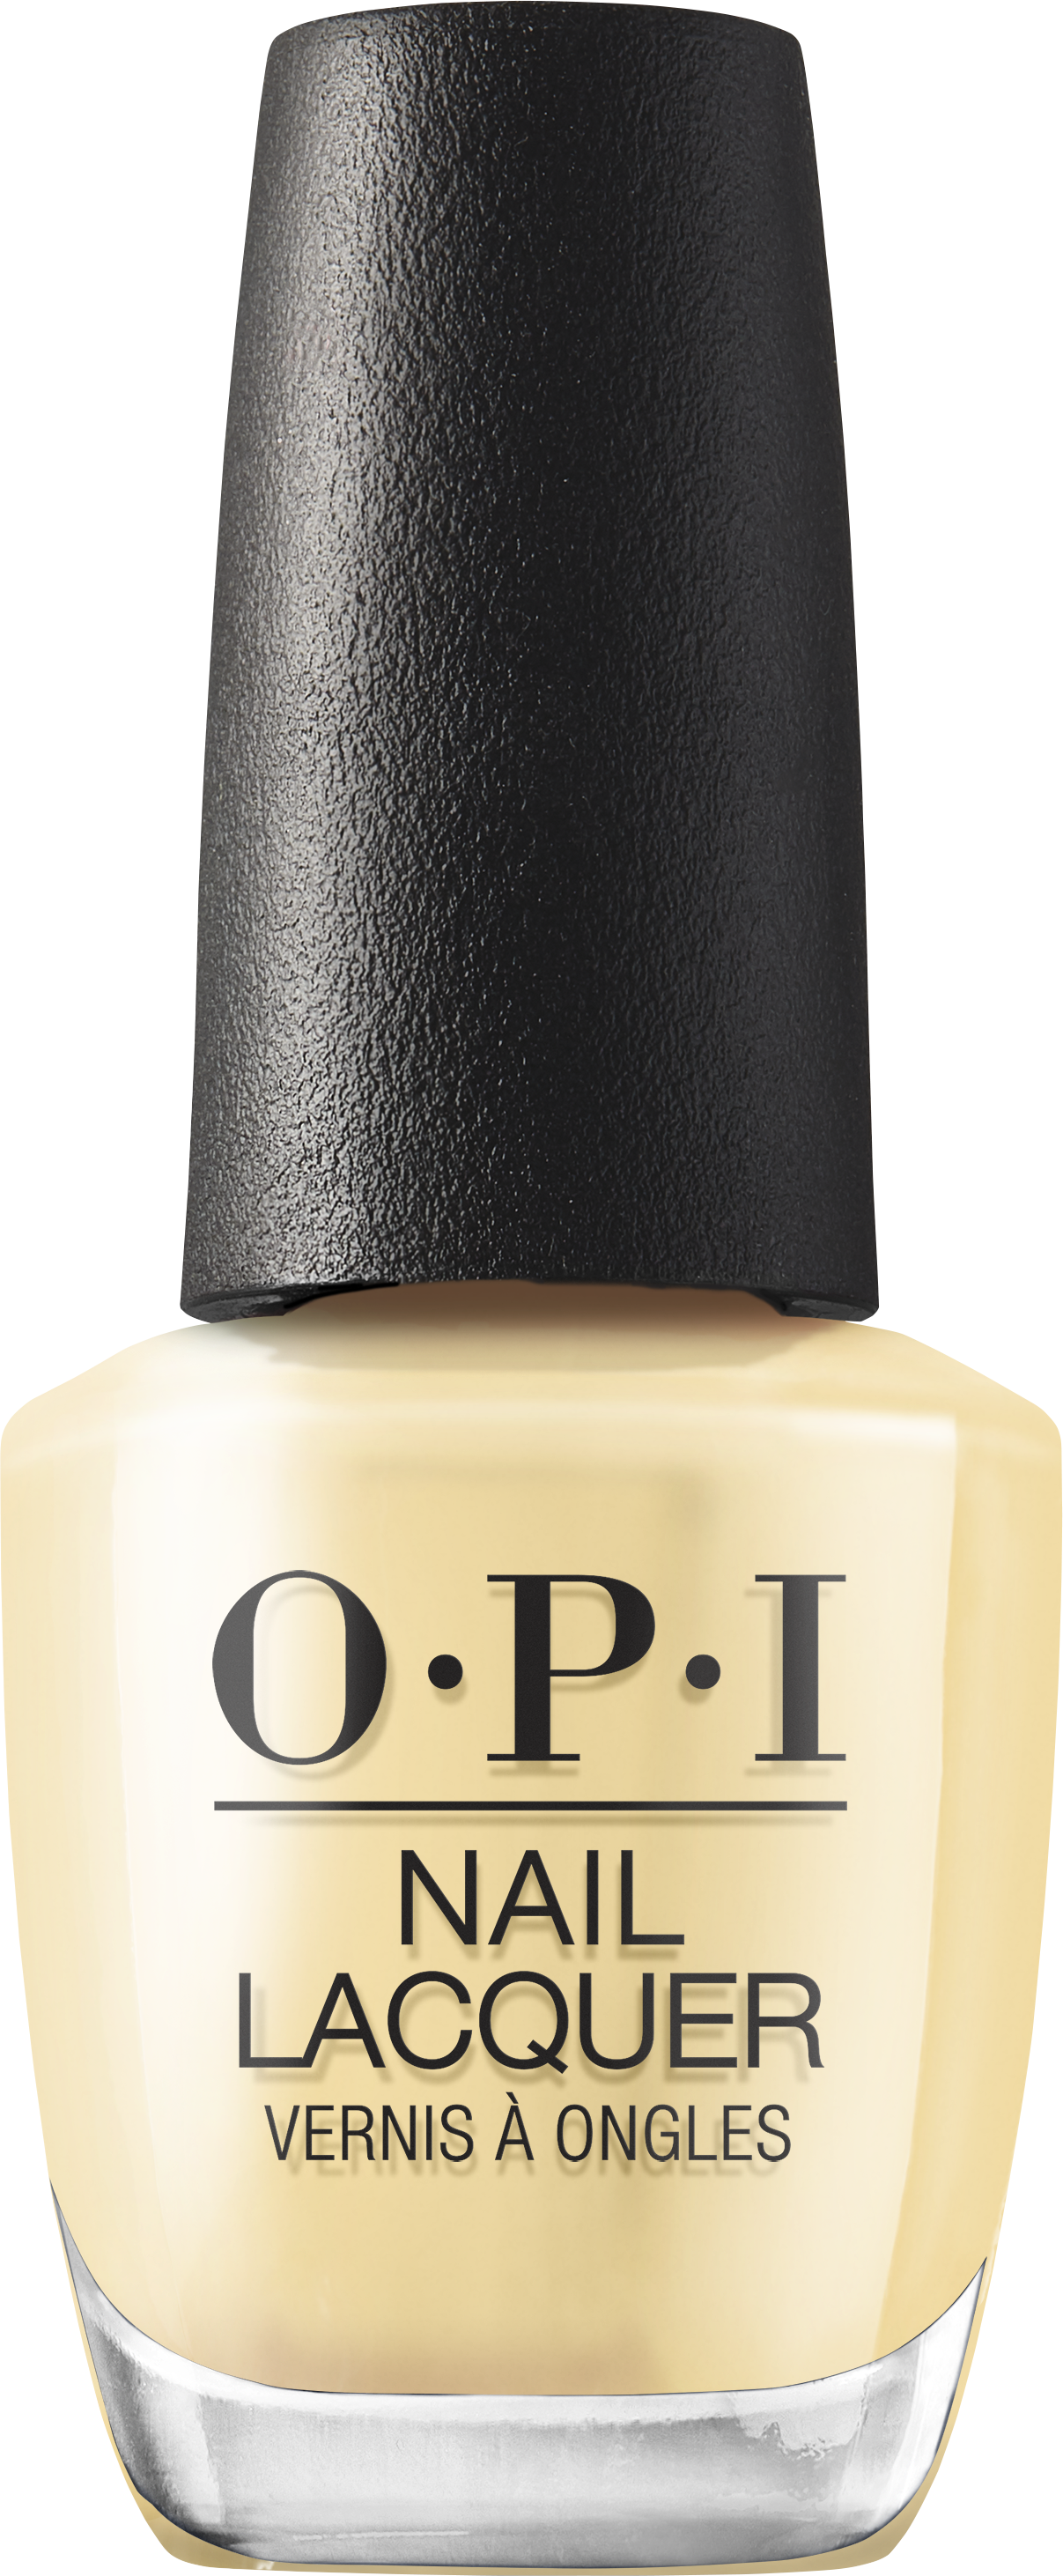 OPI Just Dropped A Hollywood Collection & Every Shade is Iconic